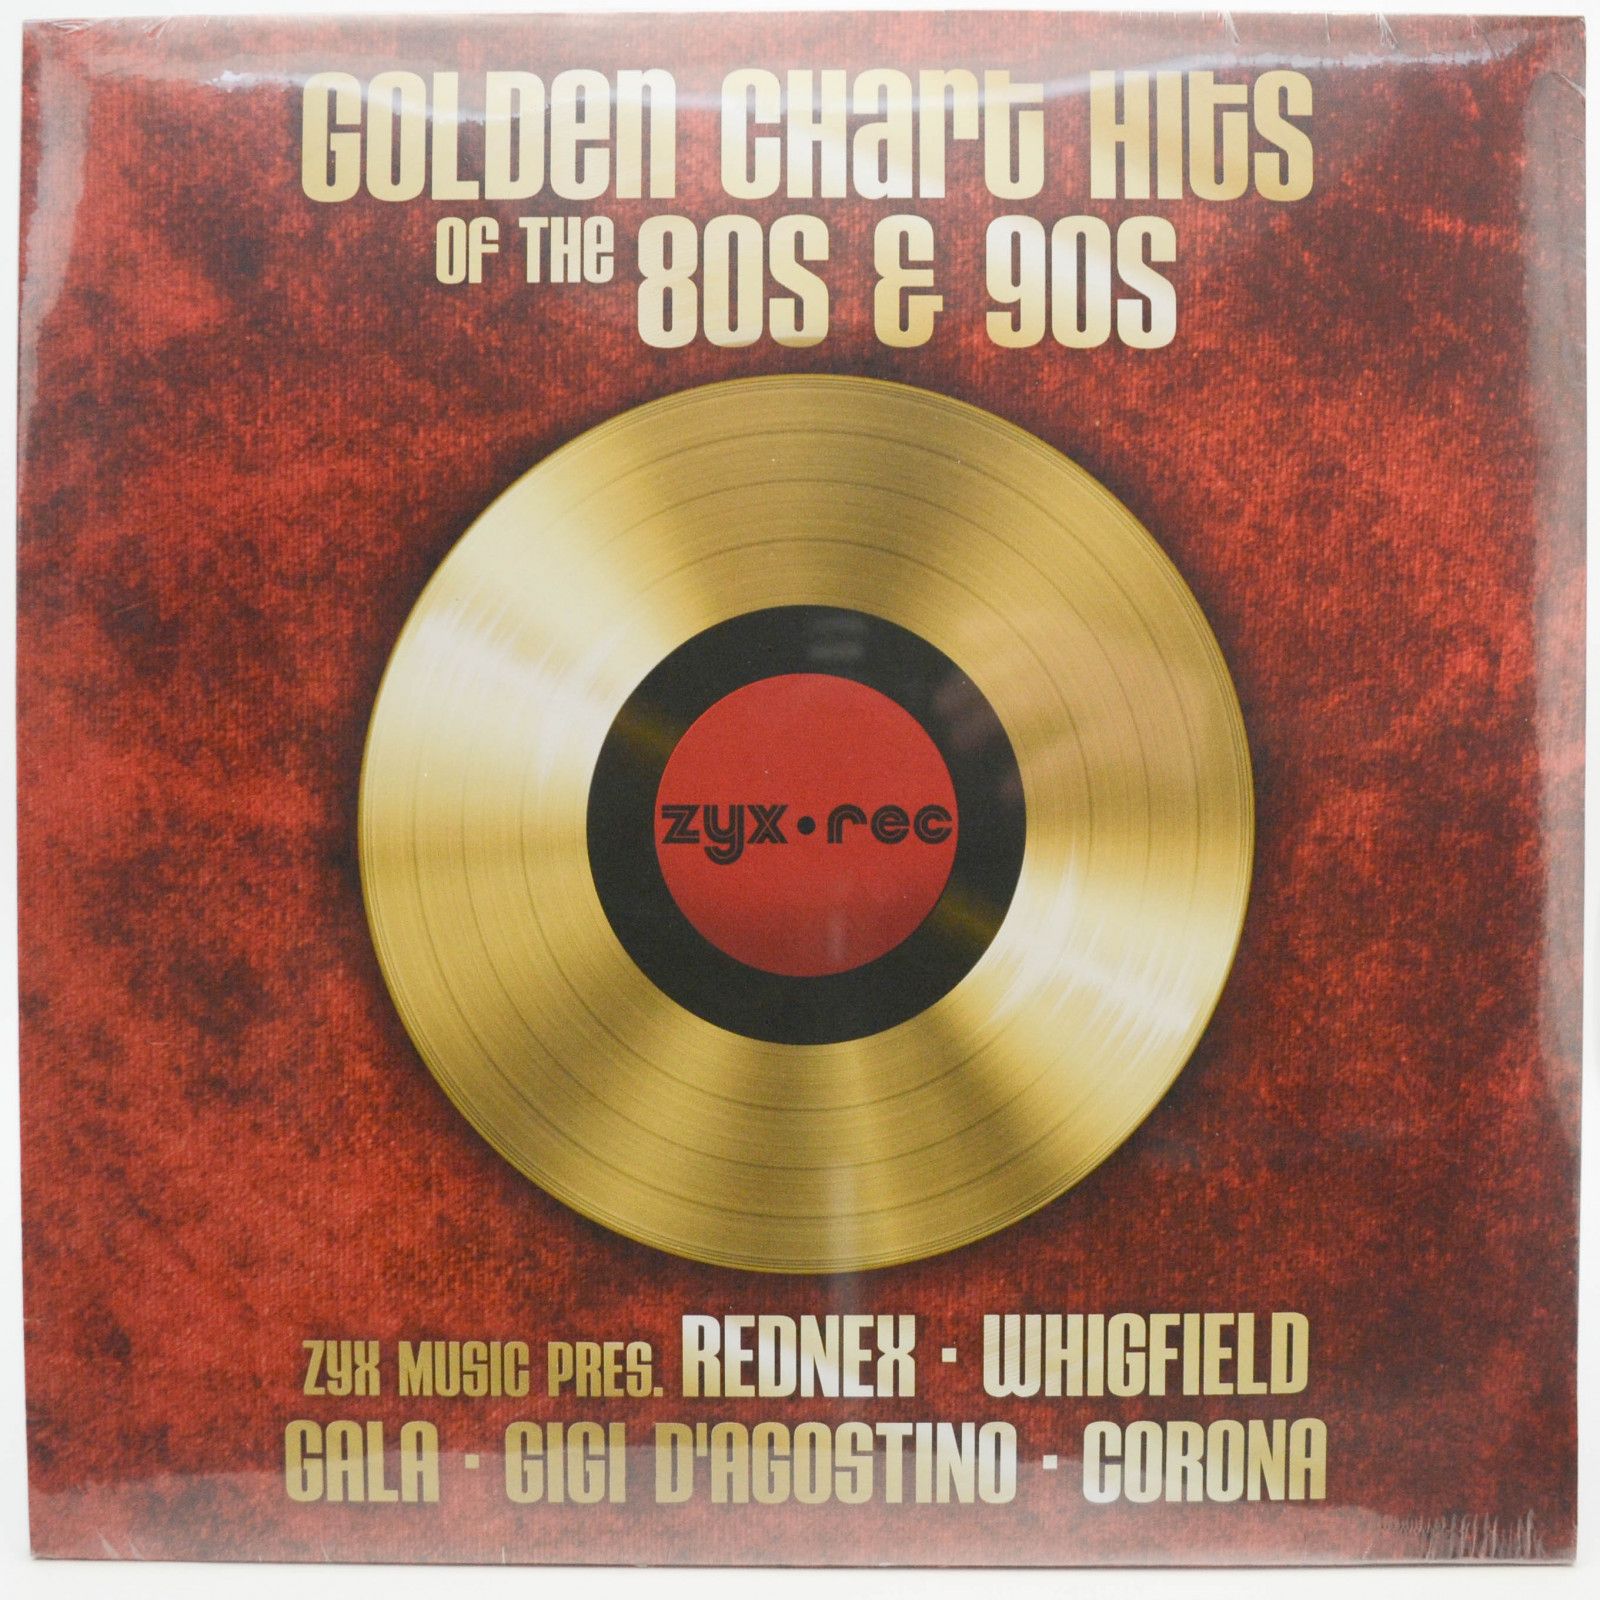 Various — Golden Chart Hits Of The 80s & 90s, 2019